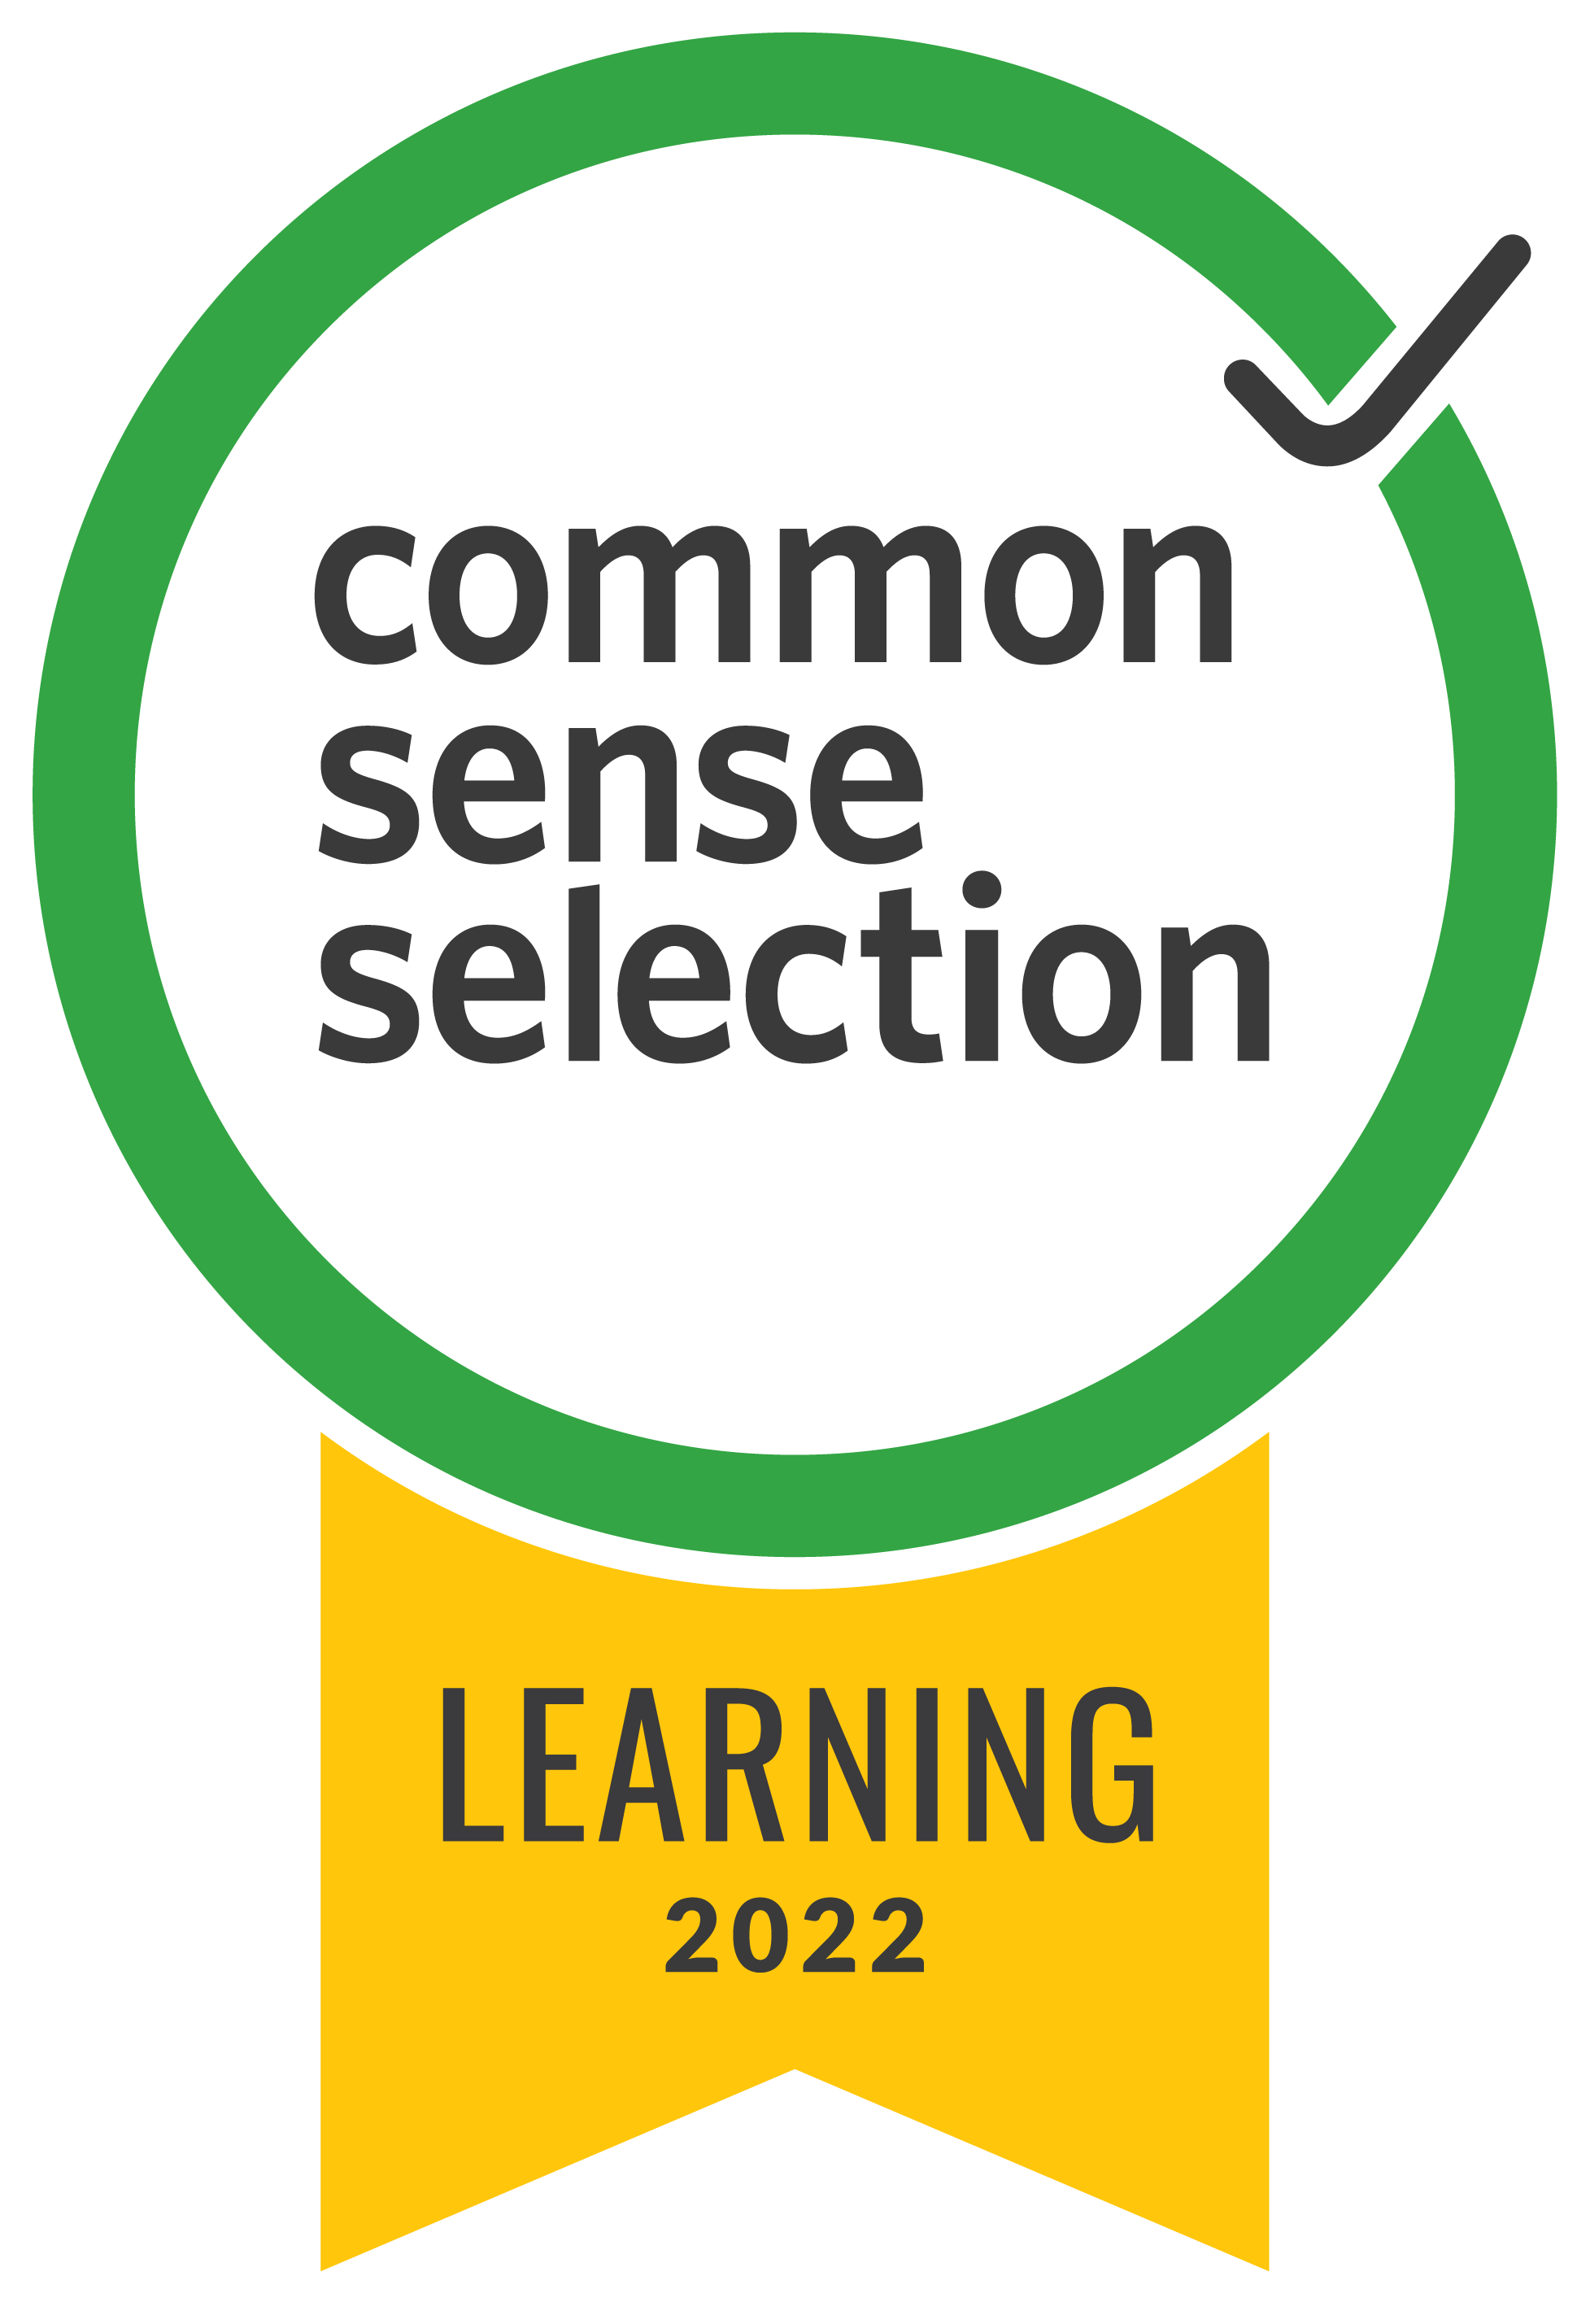 CommonSenseSelection_seal_RGB_Learning2022_2x